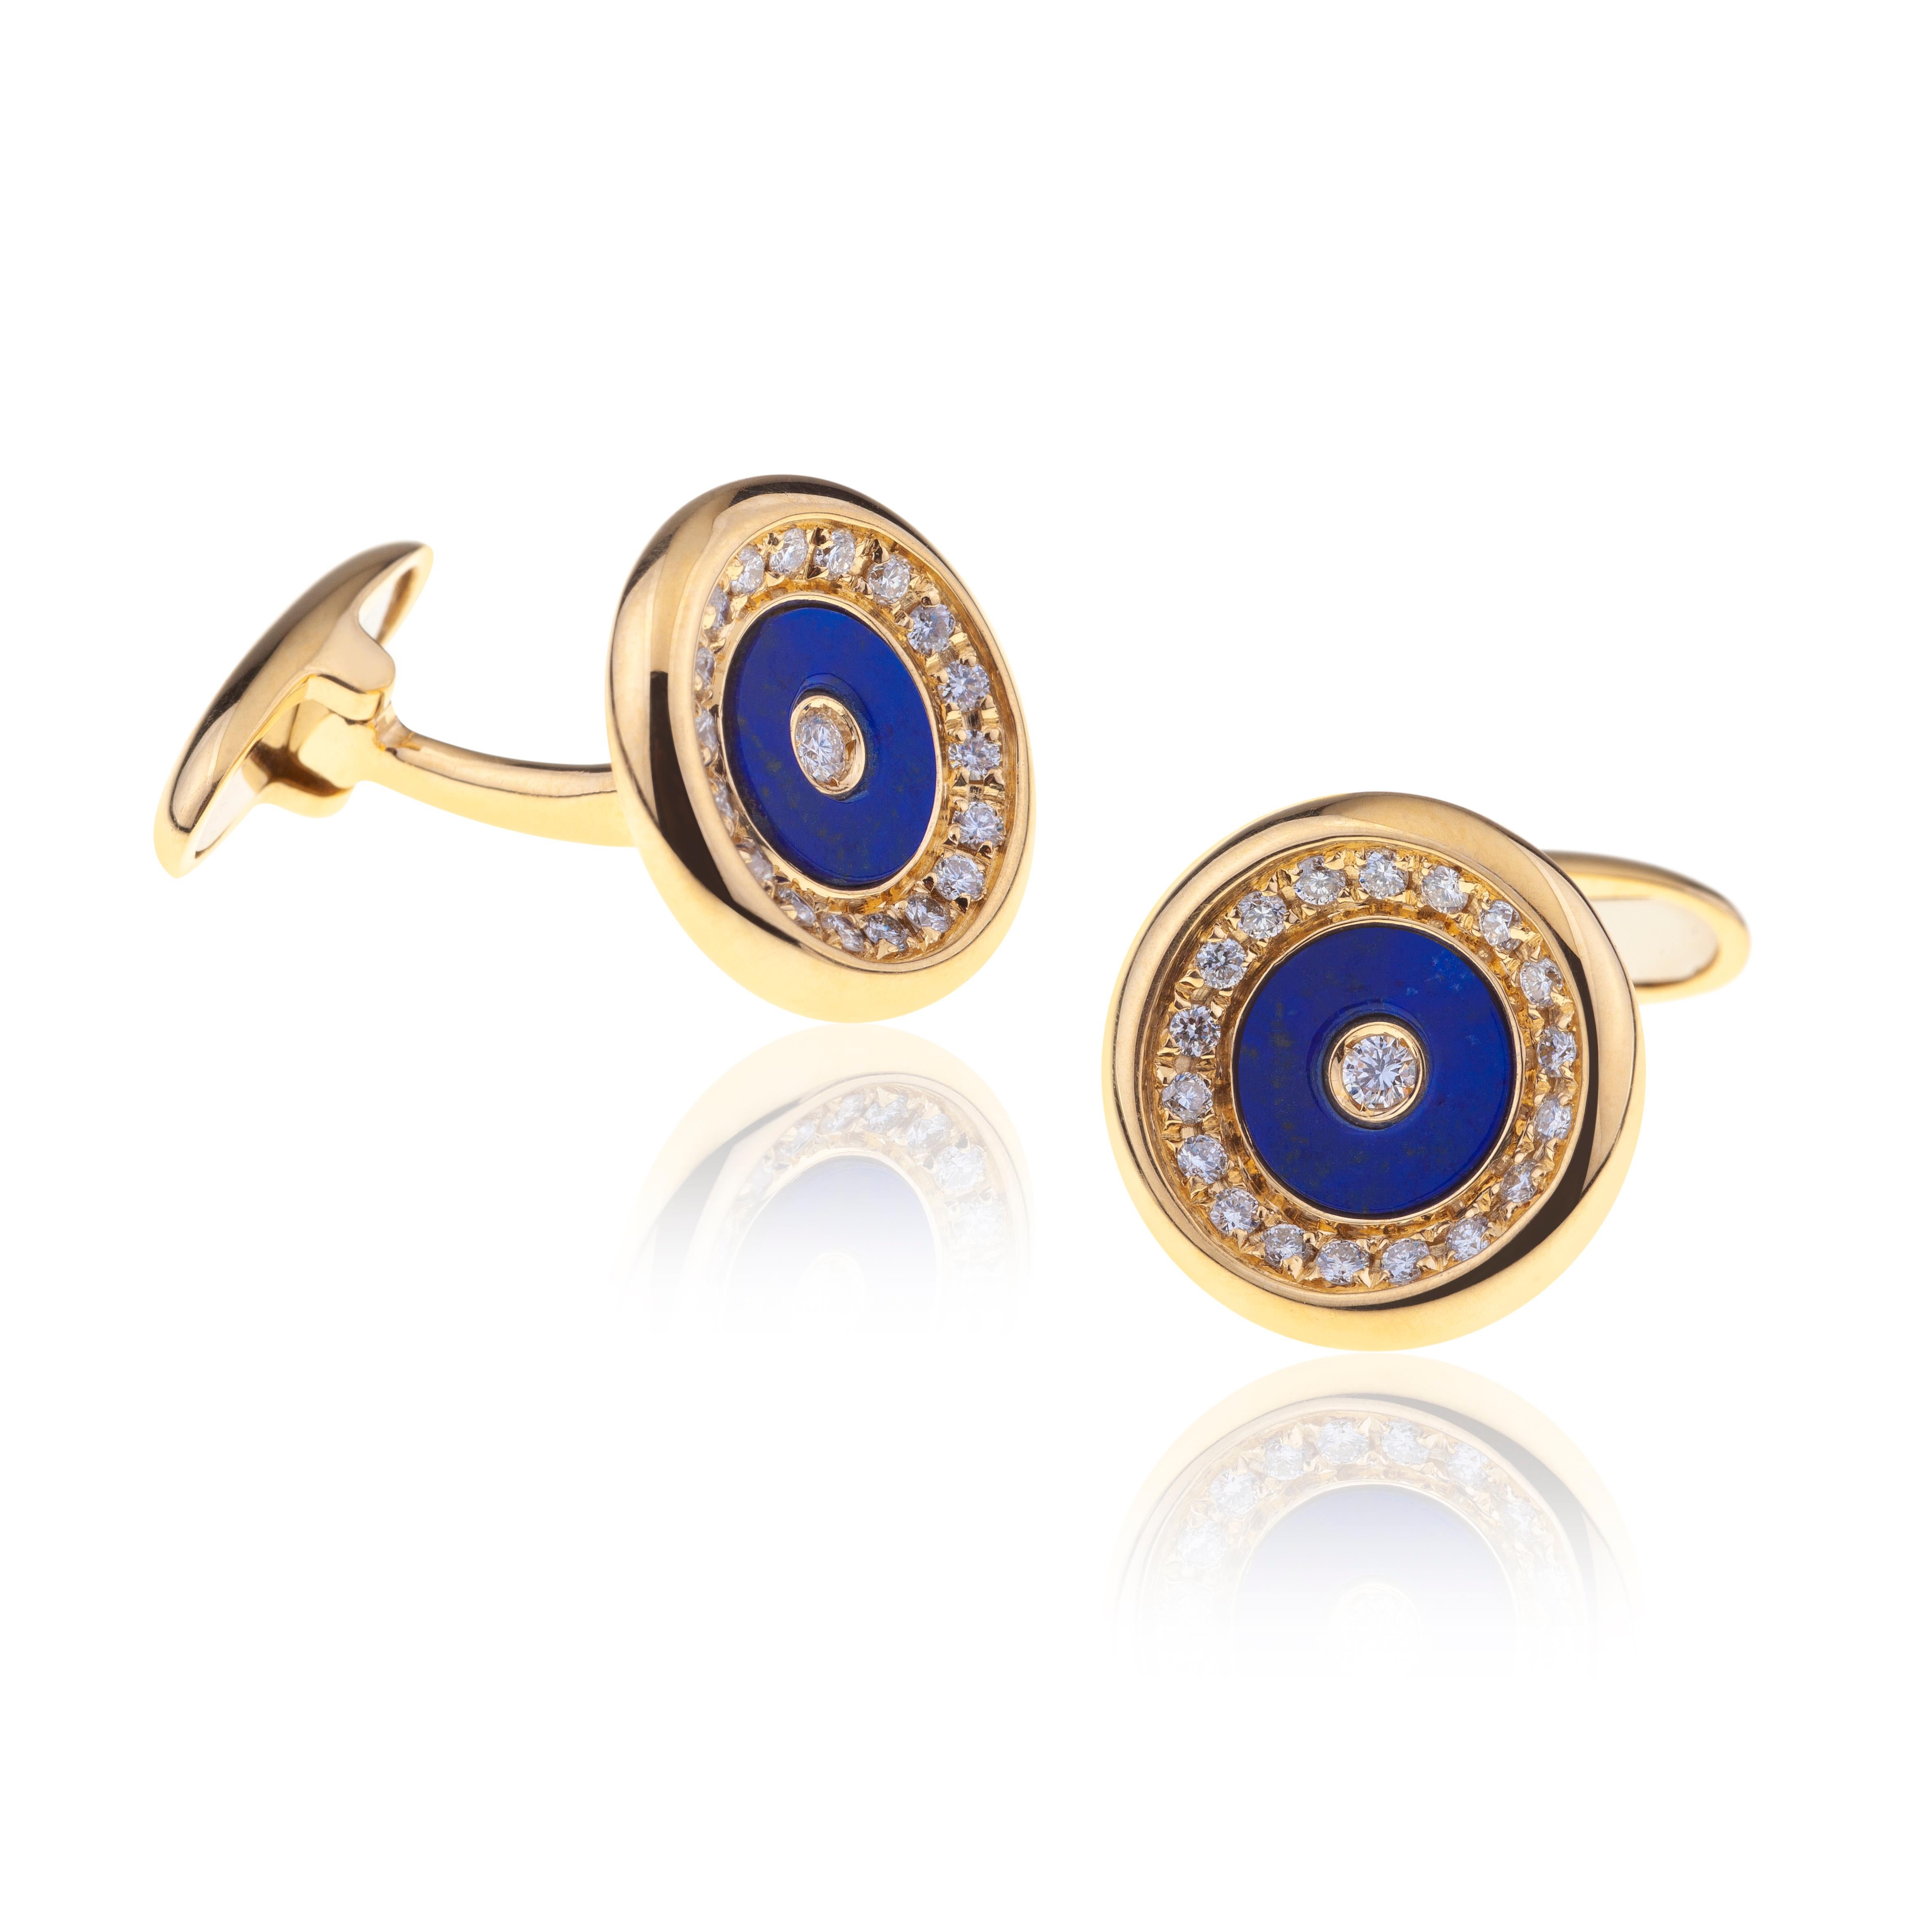 Cufflinks Round 18kt Gold with Lapislazzuli and diamonds.
Cufflinks for Men for Business or Leisure Time to be worn on white, light blue or stripe Cuff Shirts.  
The circle of lapislazzuli is set on gold with a circle of diamonds and a central one,